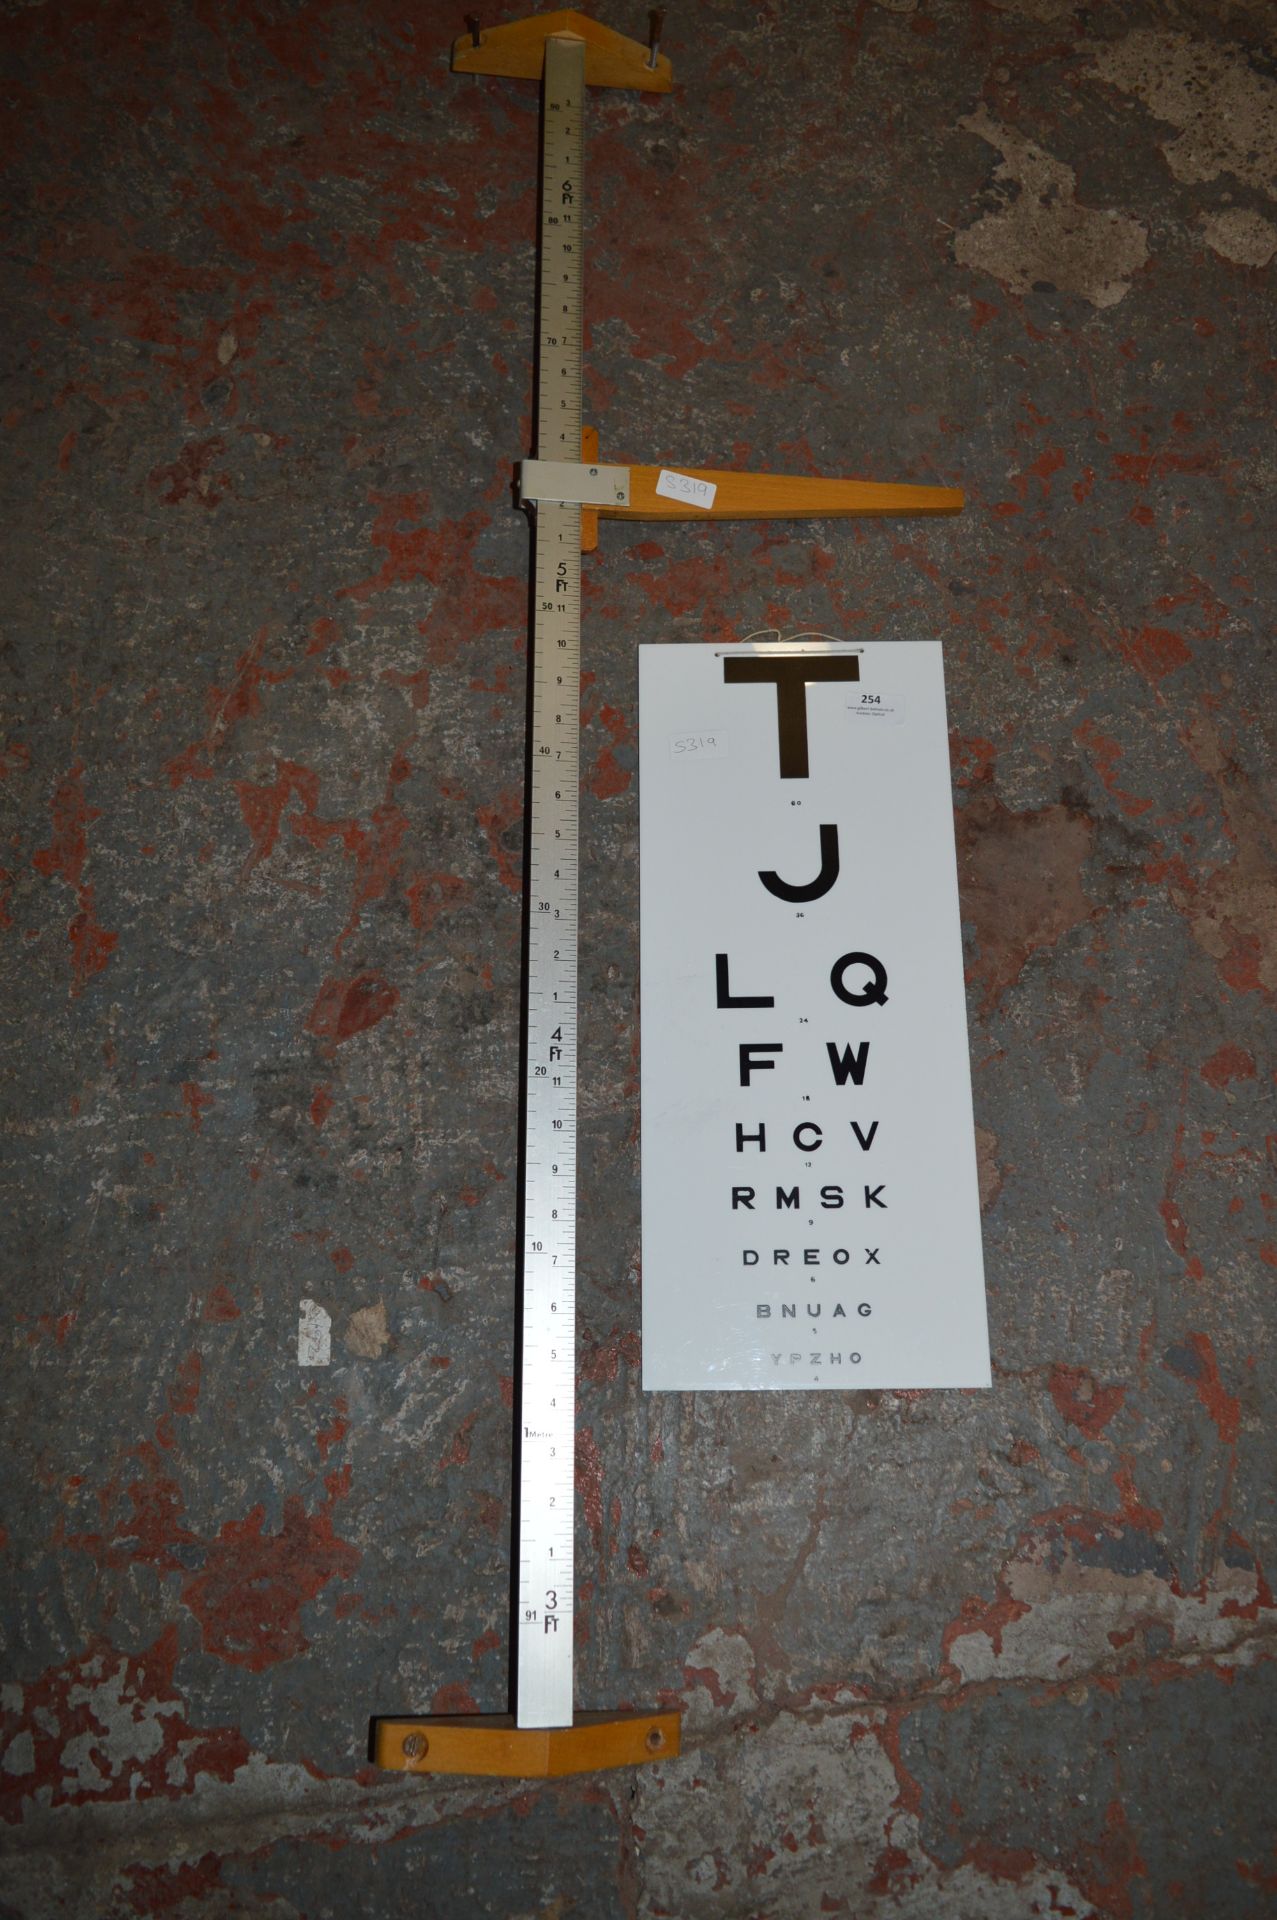 Height Gauge and a Eye Testing Chart